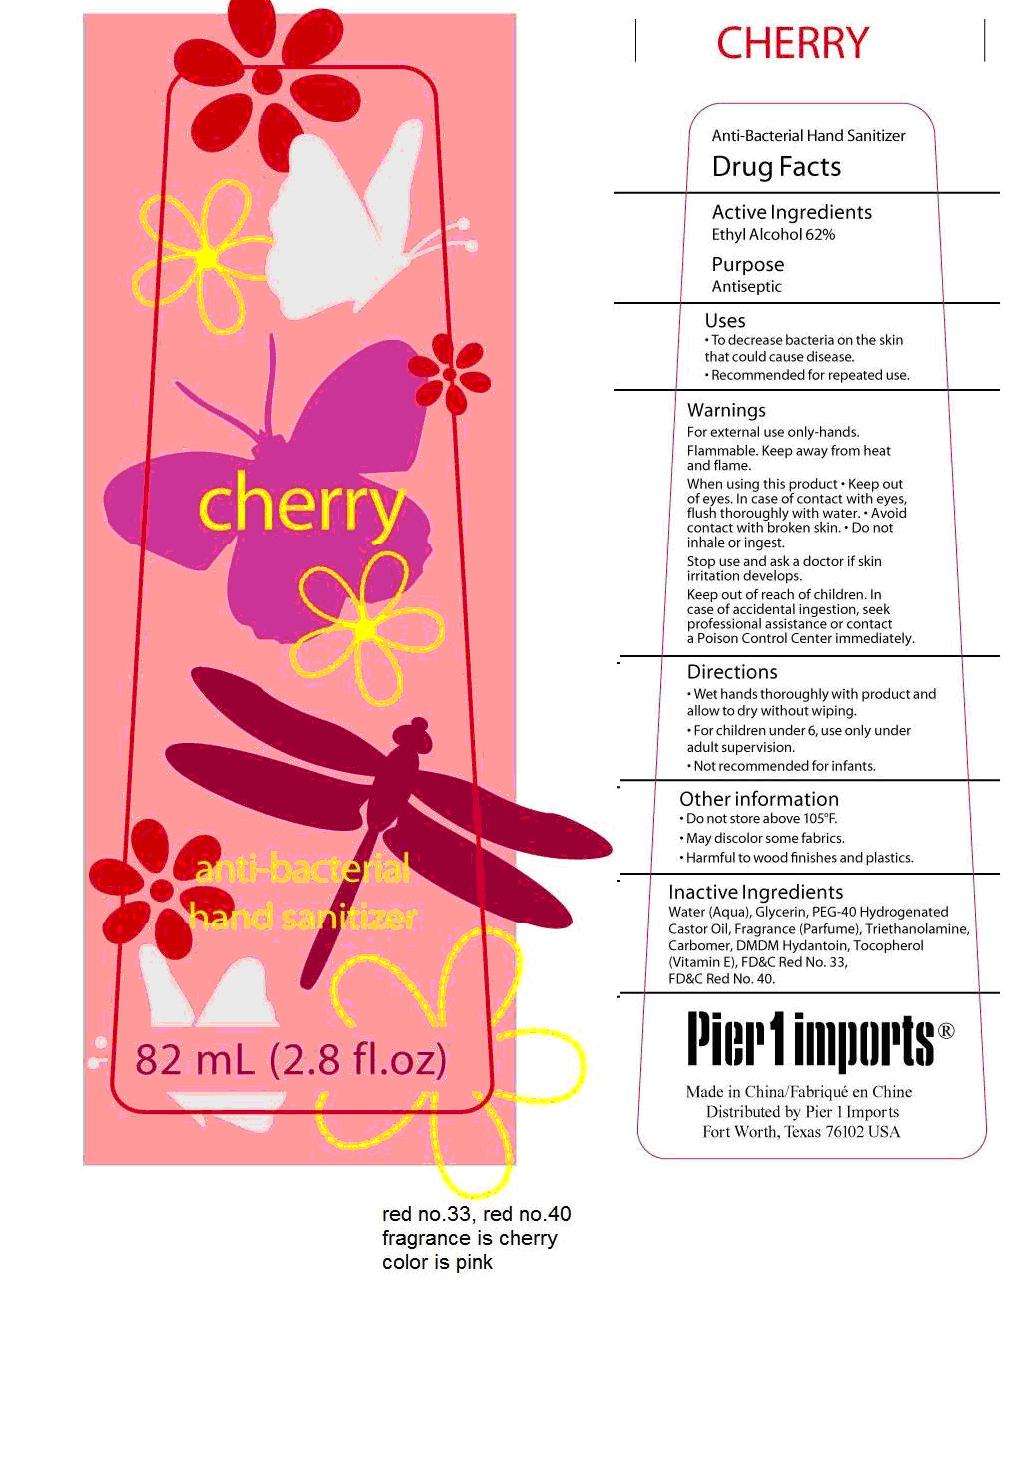 Pier 1 Imports Cherry Anti-Bacterial Hand Sanitizer